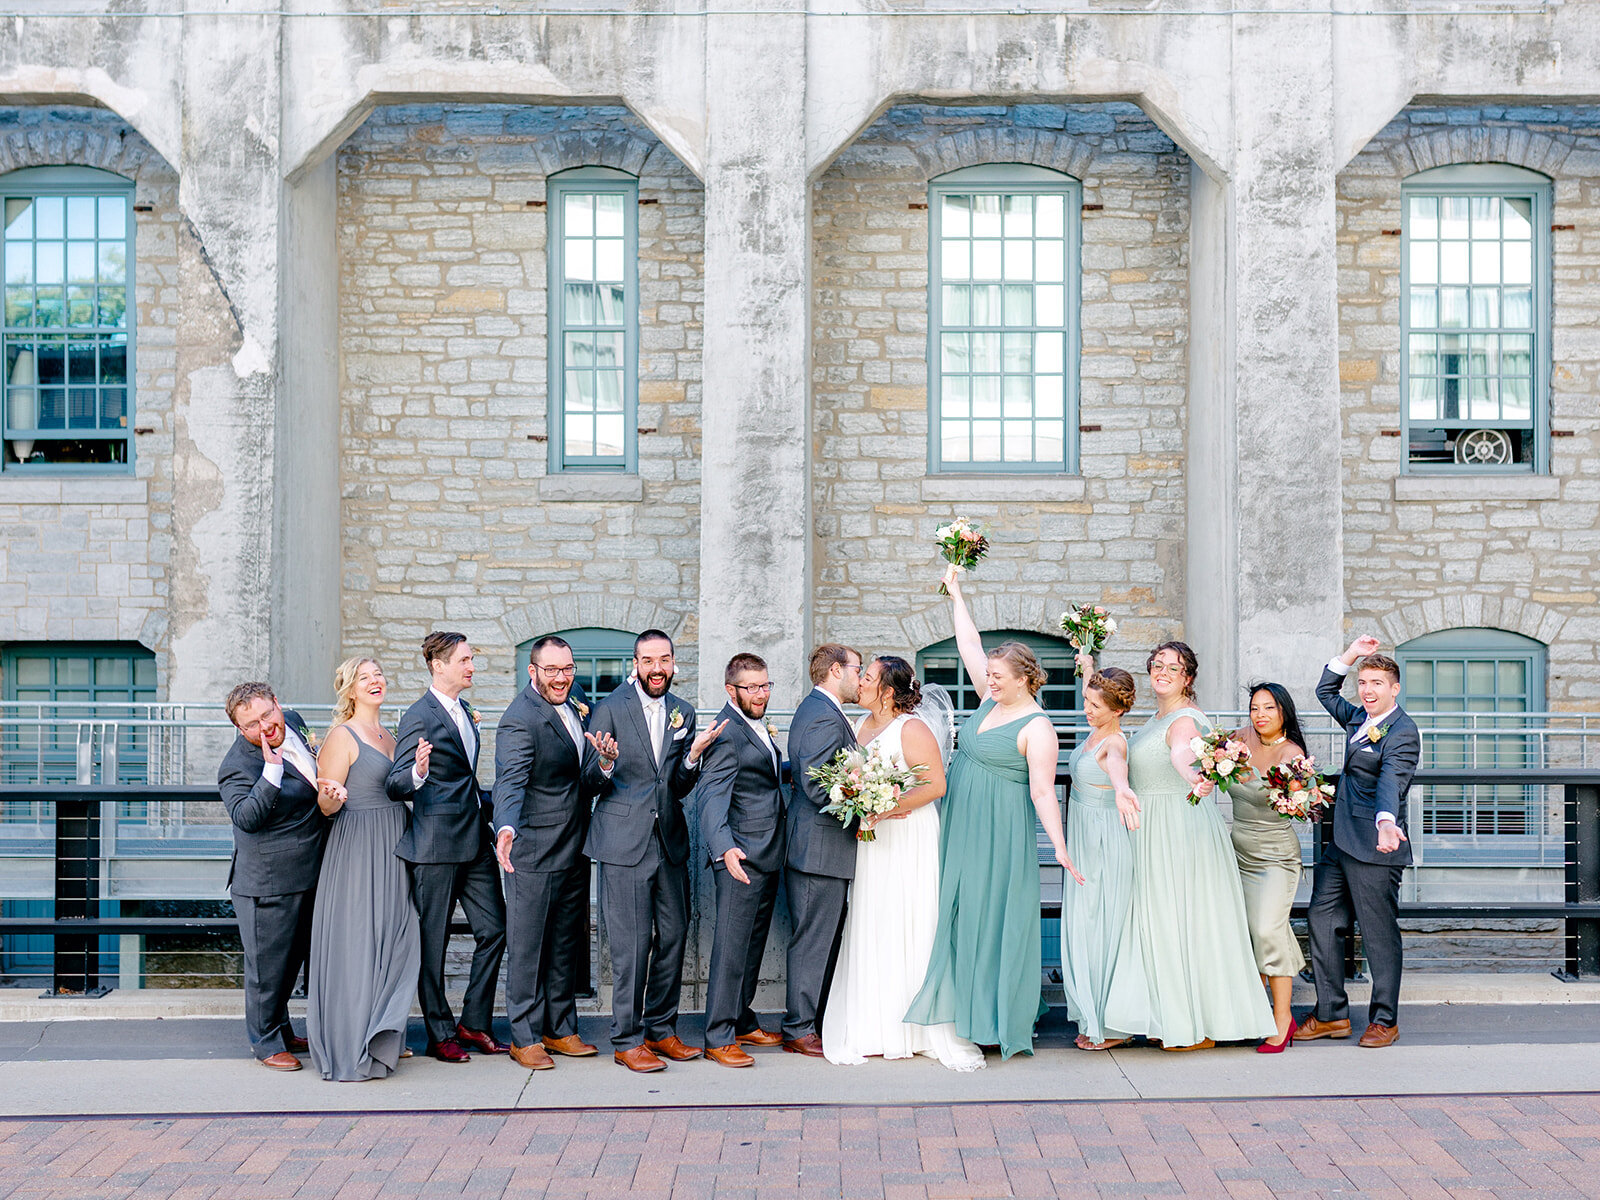 wedding-party-green-dresses-gray-suits